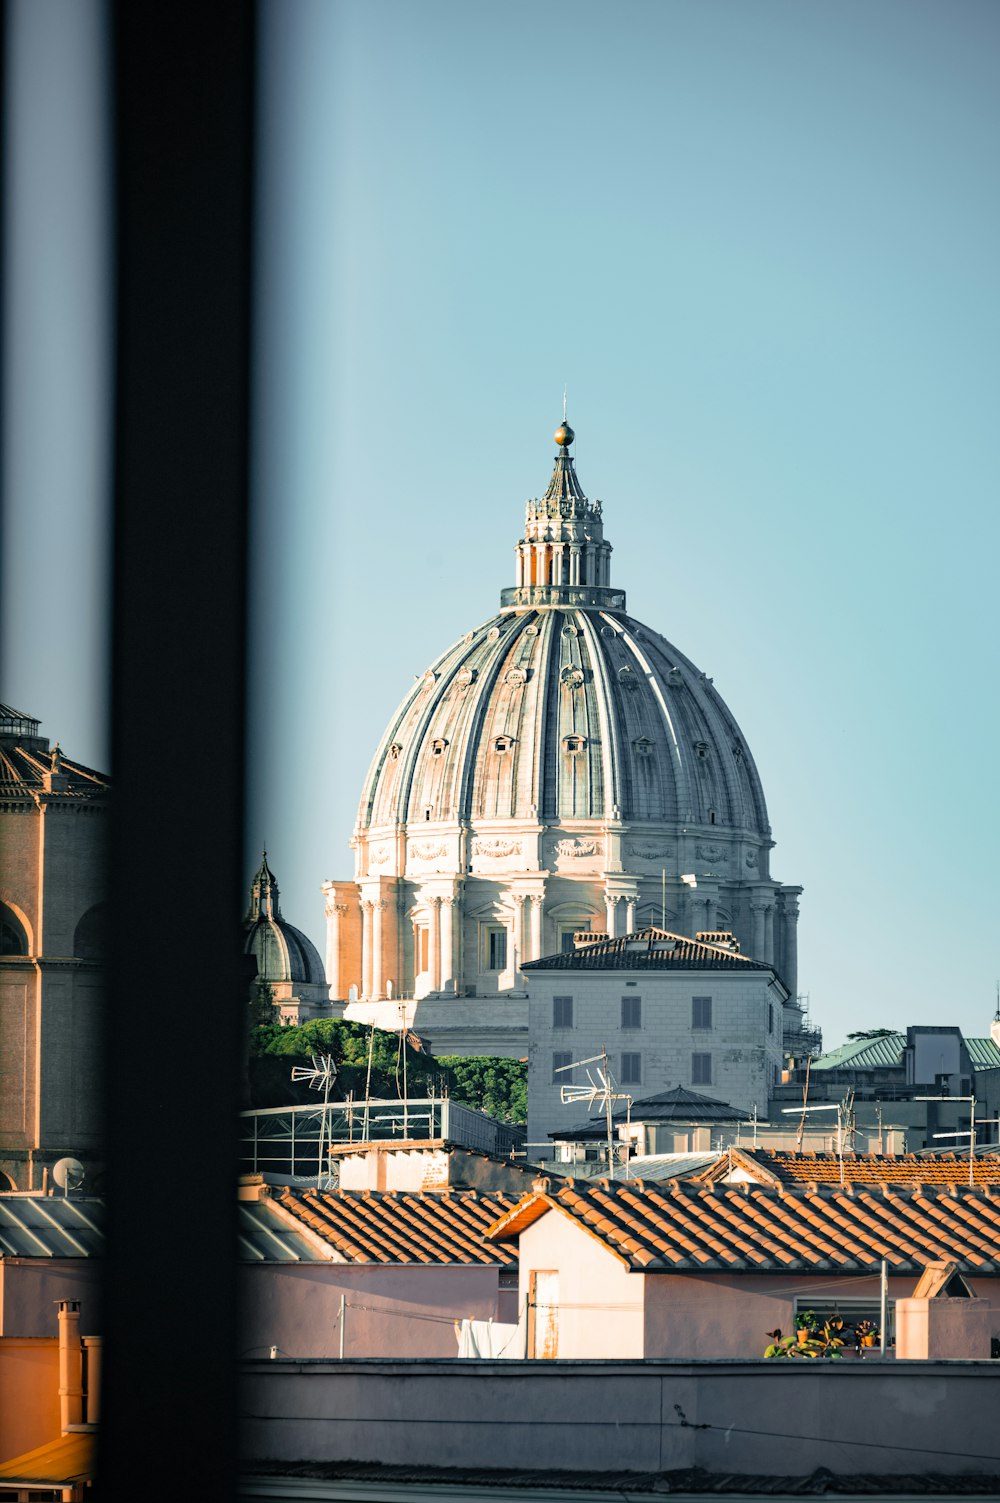 a domed building with a dome with St. Peter's Basilica in the background